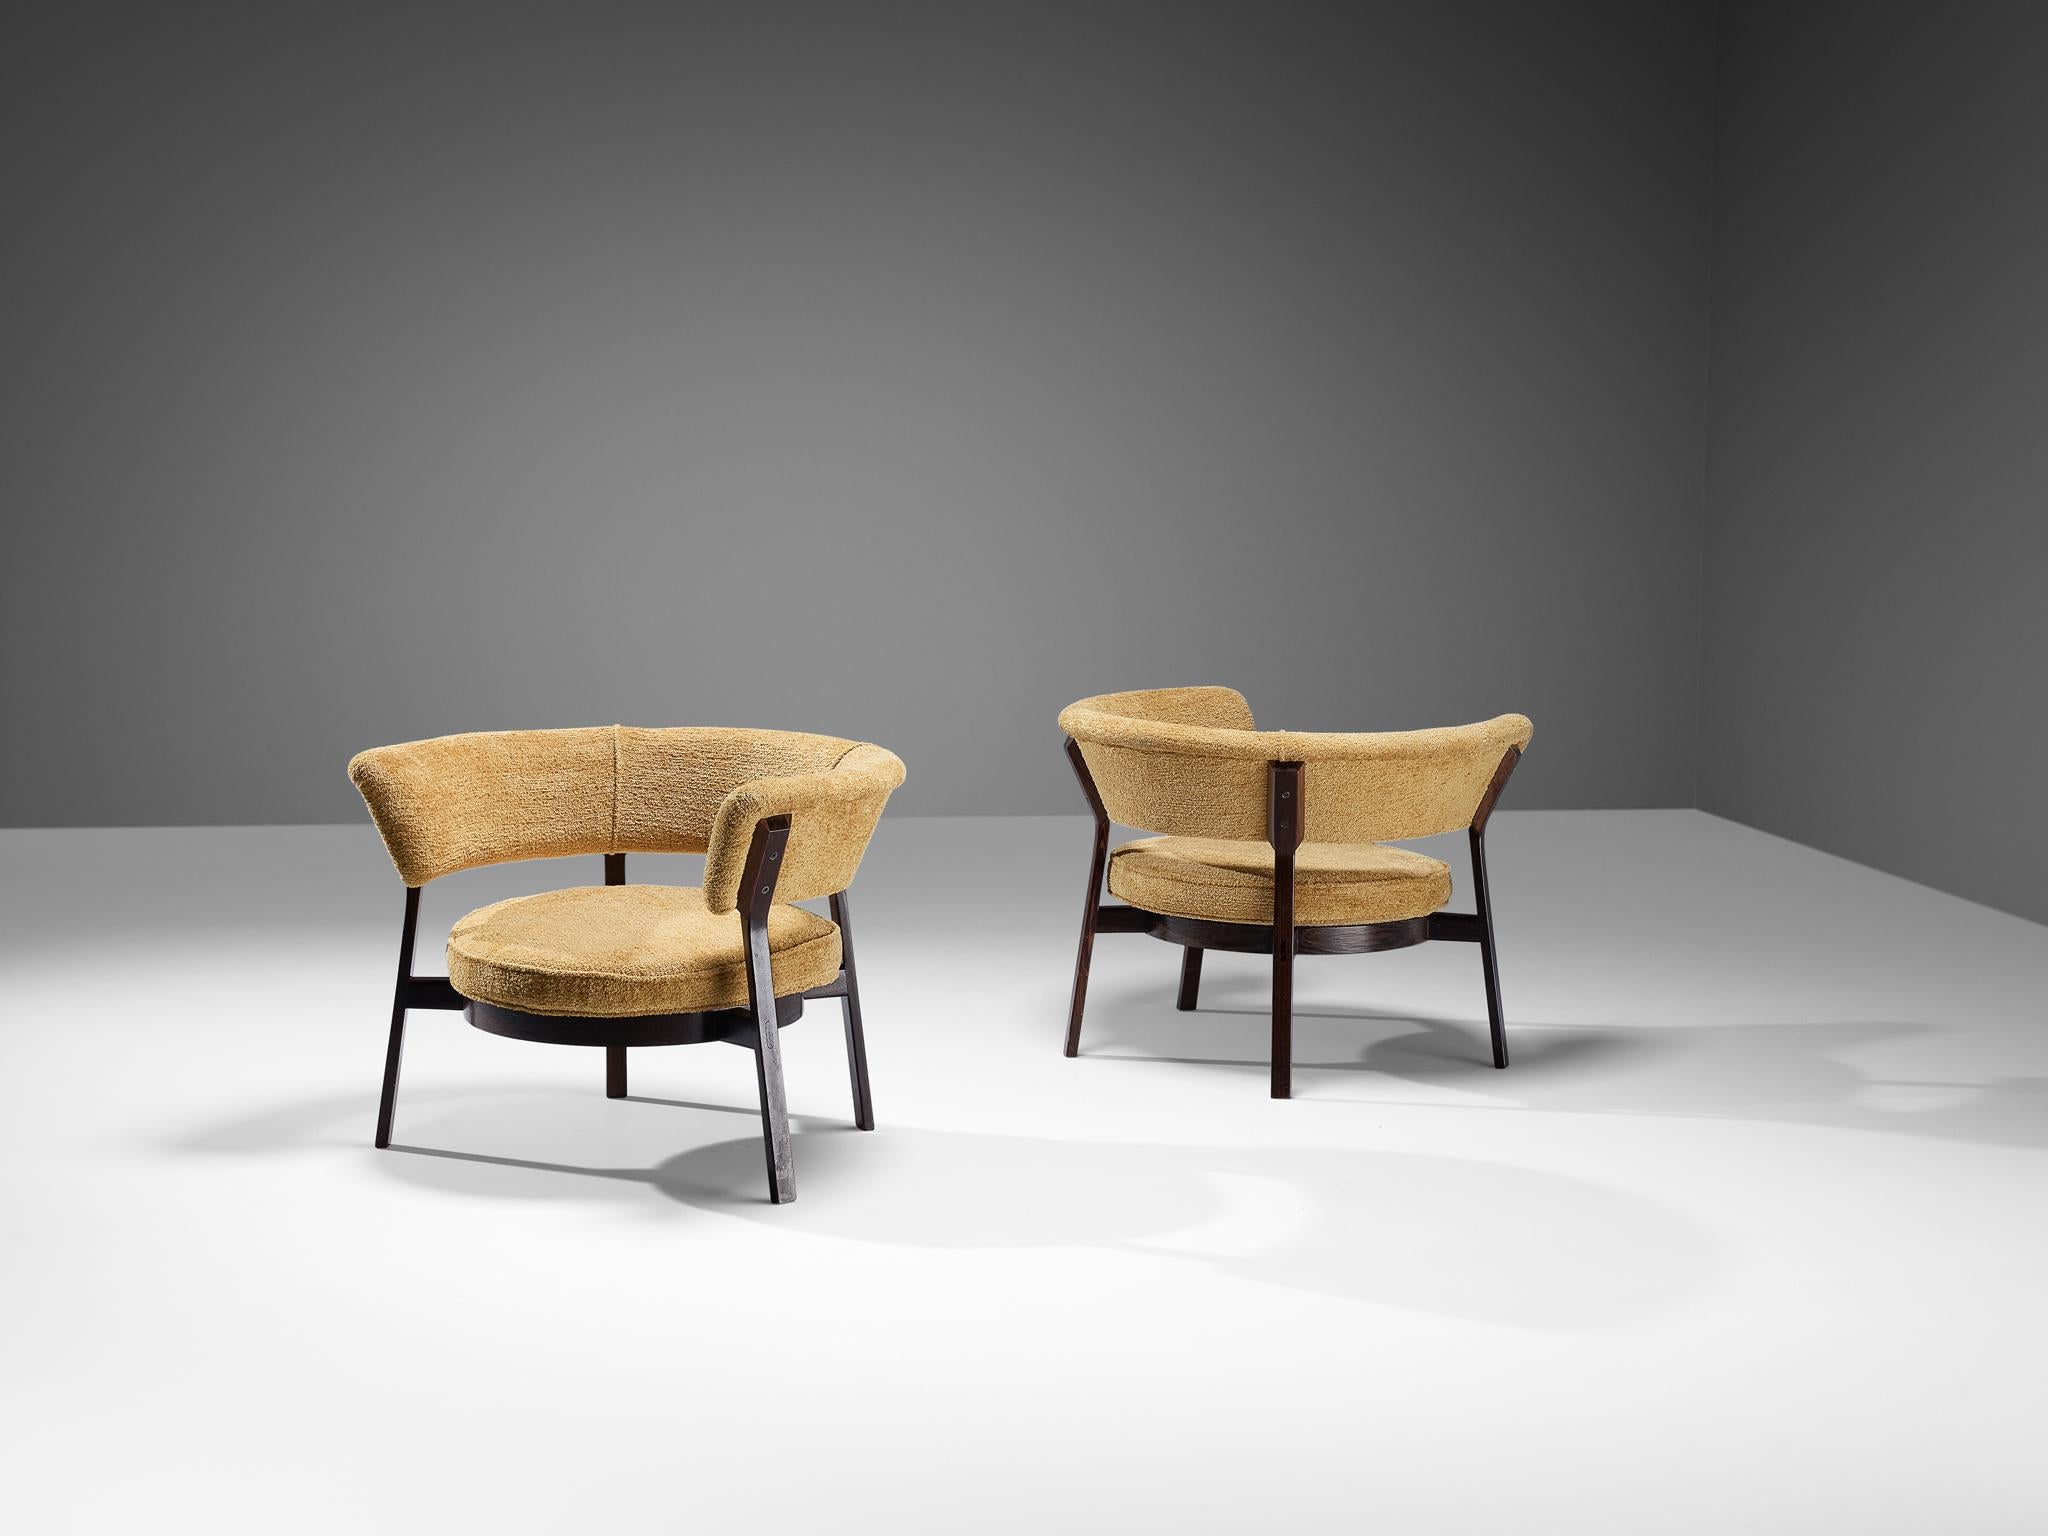 Eugenio Gerli for Tecno, pair of armchairs, model 'P28', wengé, fabric, Italy, 1958

Eugenio Gerli designed these lounge chairs model 'P28' for the Italian furniture company Tecno in 1958. The frame is characterized by an open and clean